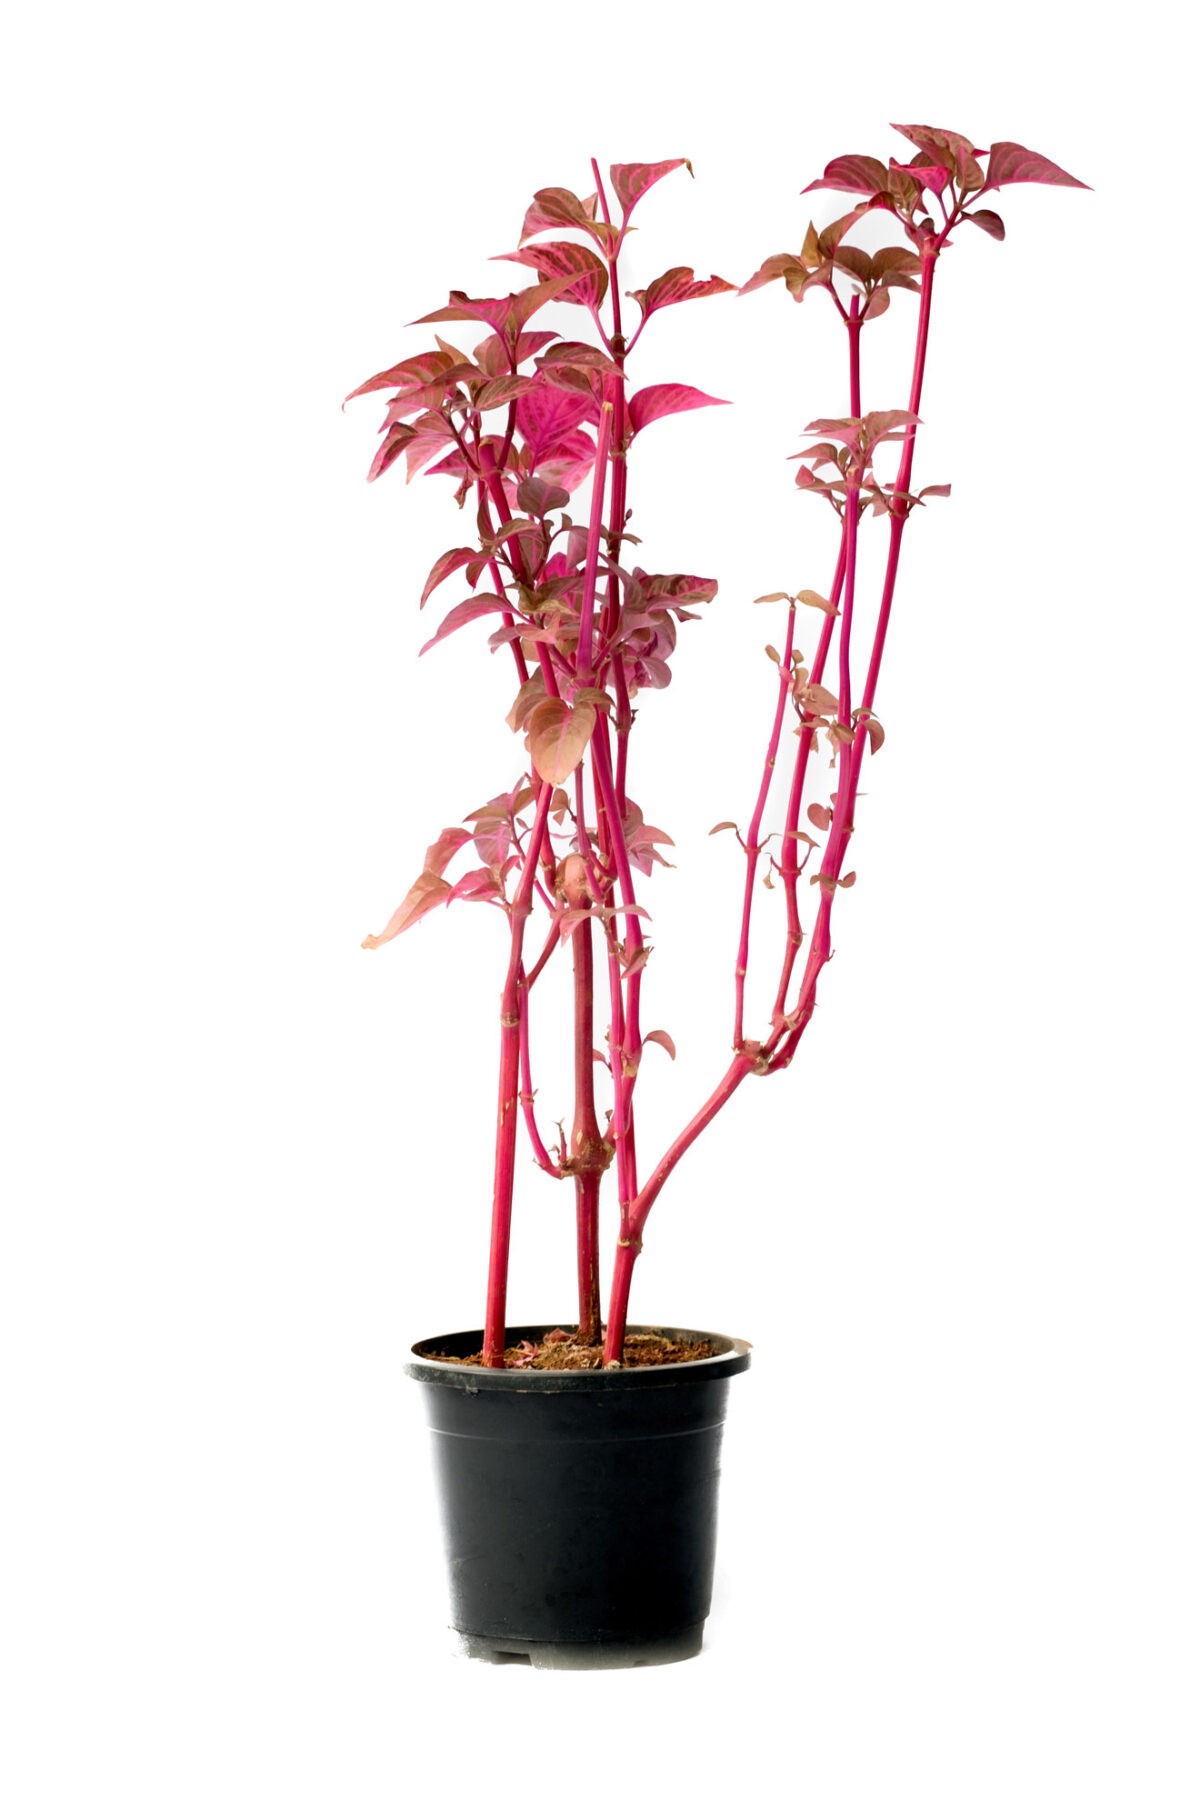 Iresine Herbstii pink leaves and pink stem from online live nursery india